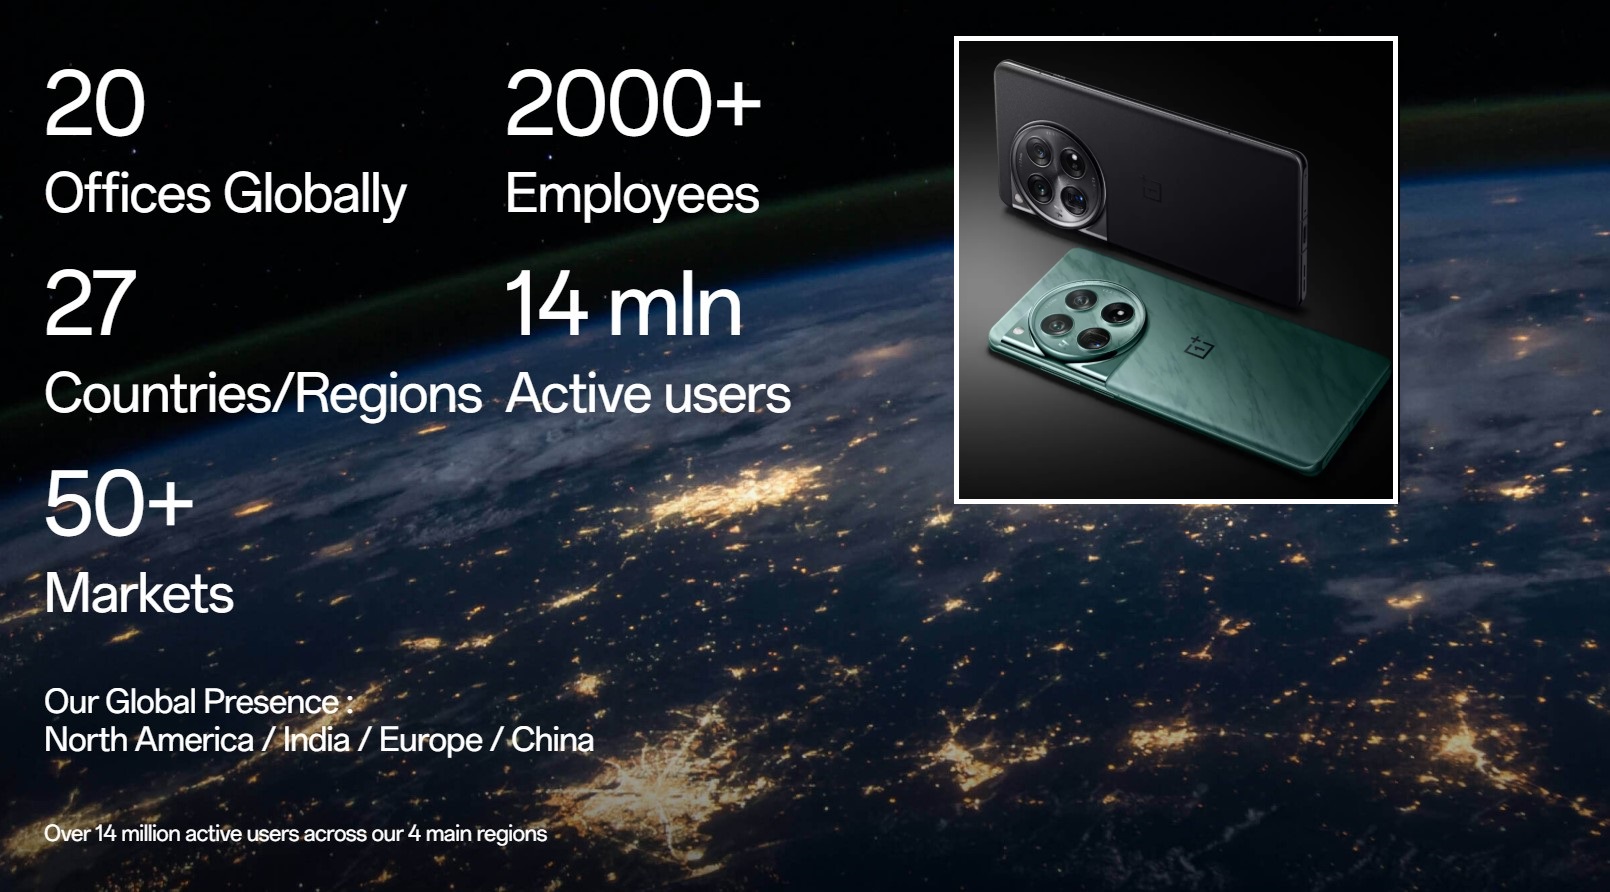 OnePlus company offices and users statistics across the world